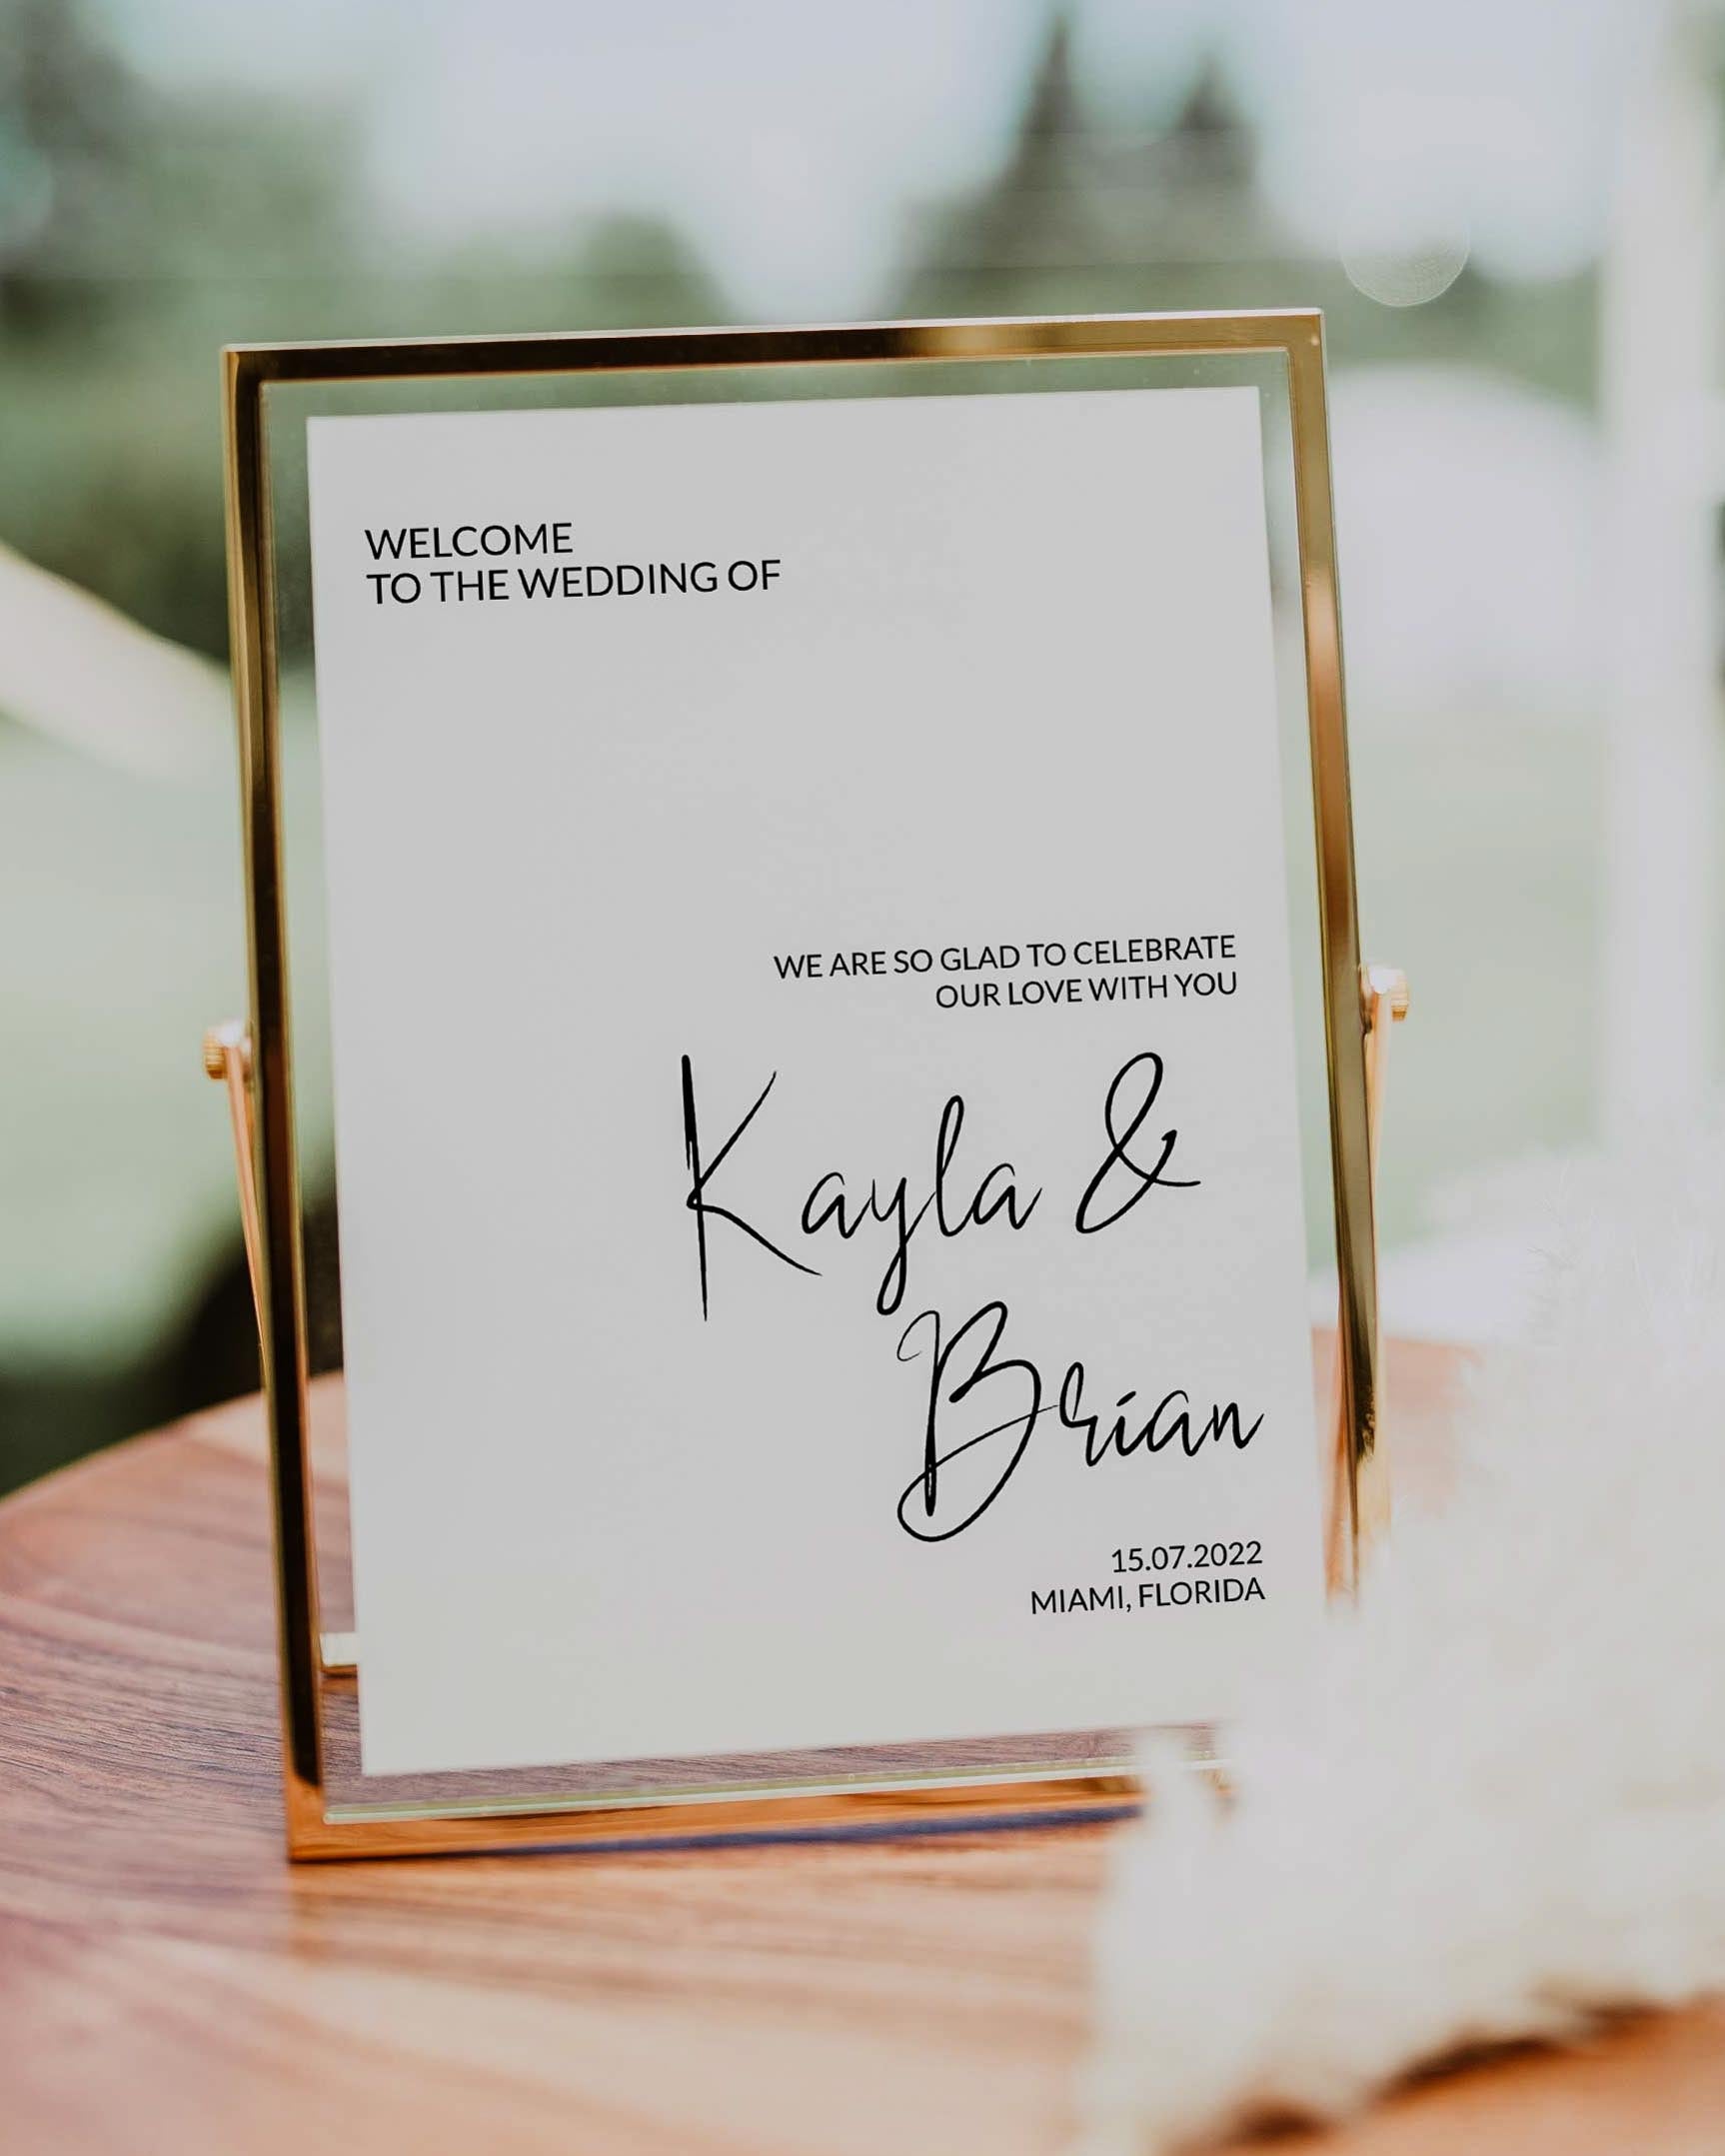 Welcome to our Wedding Sign Template